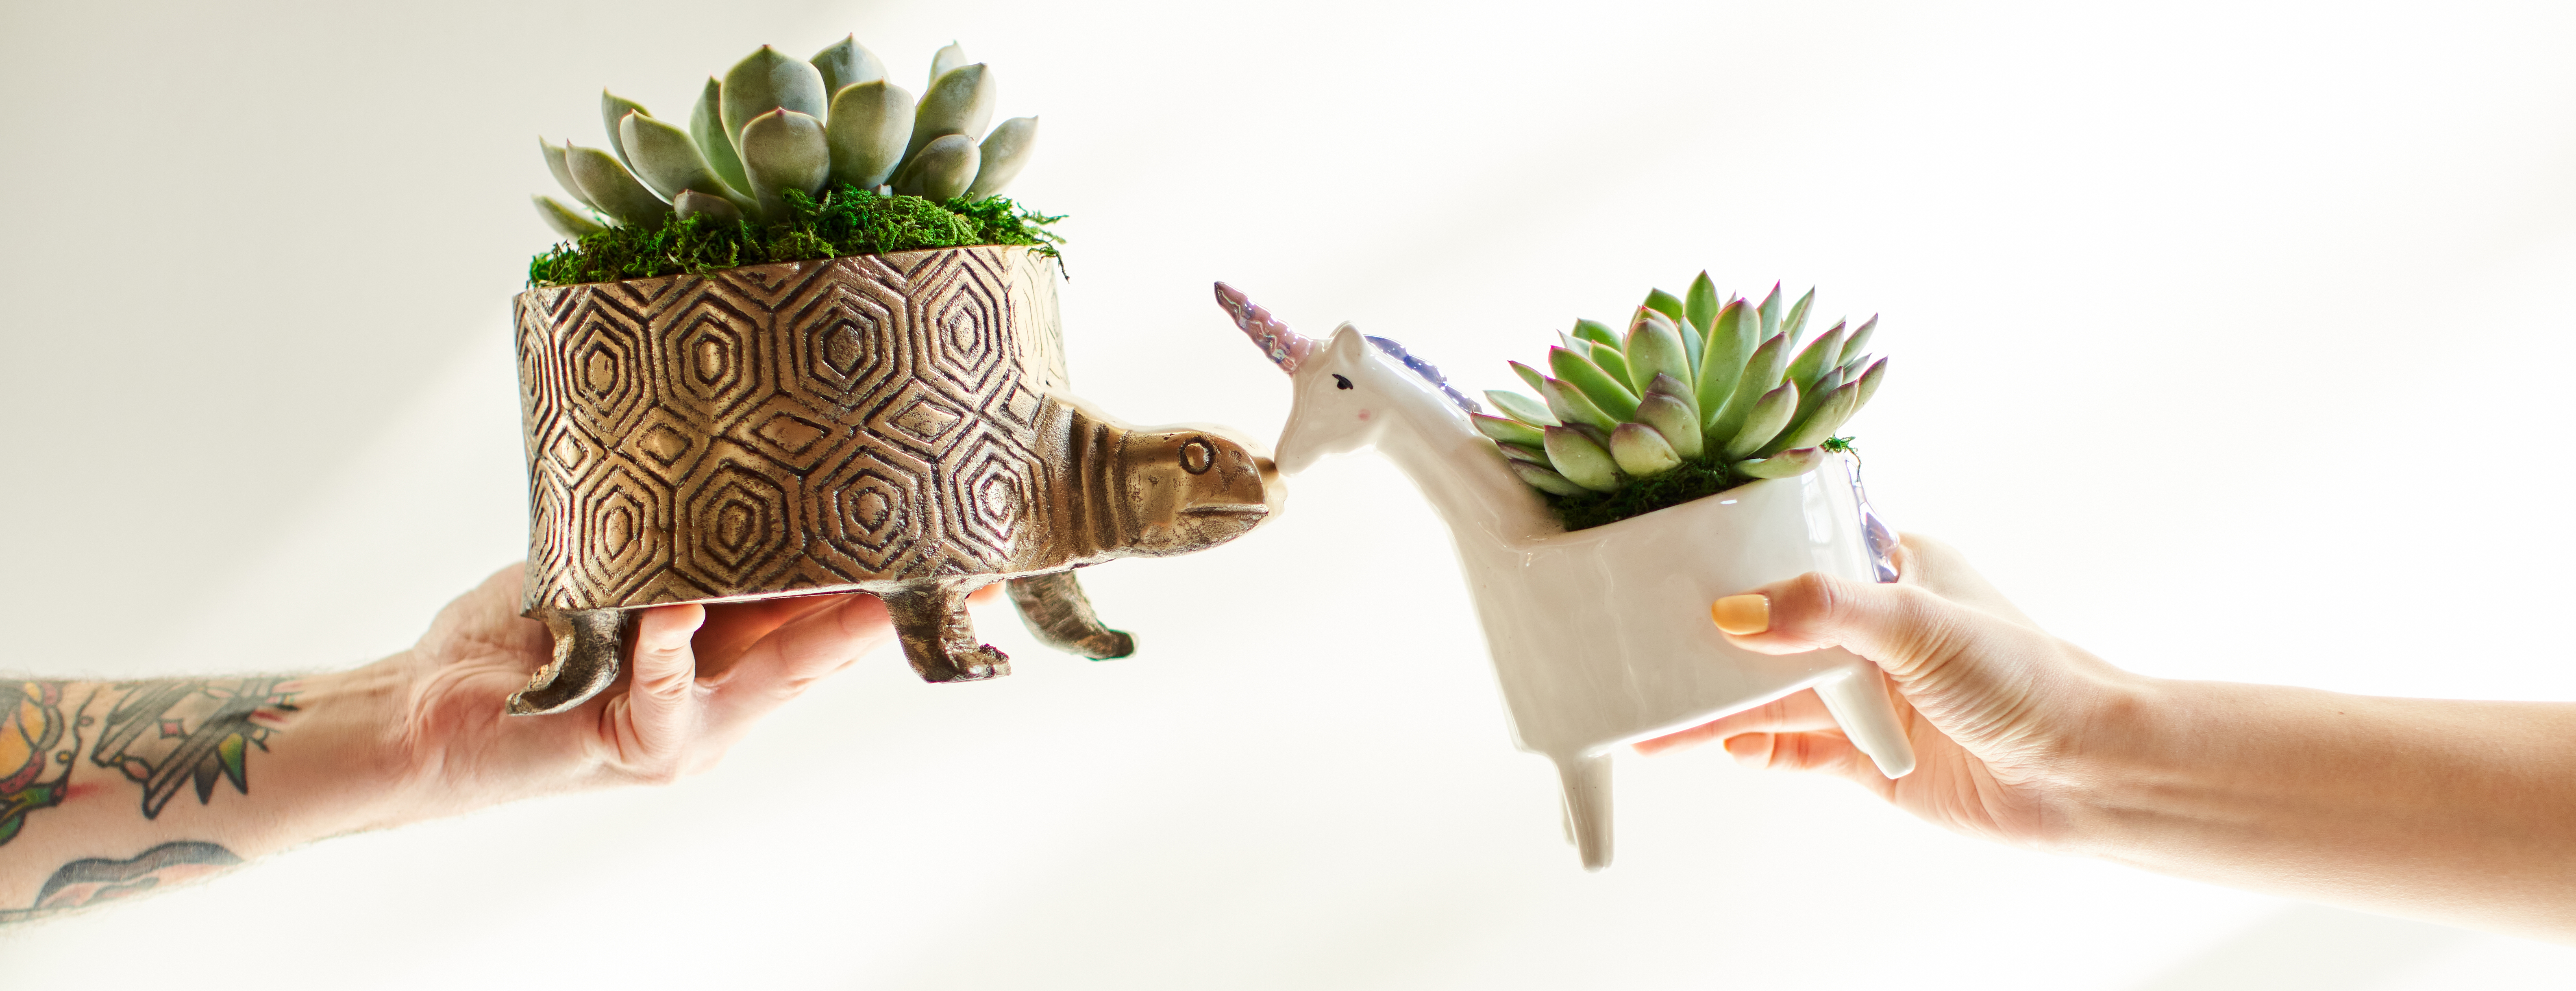 Hands holding two succulents in animal planters